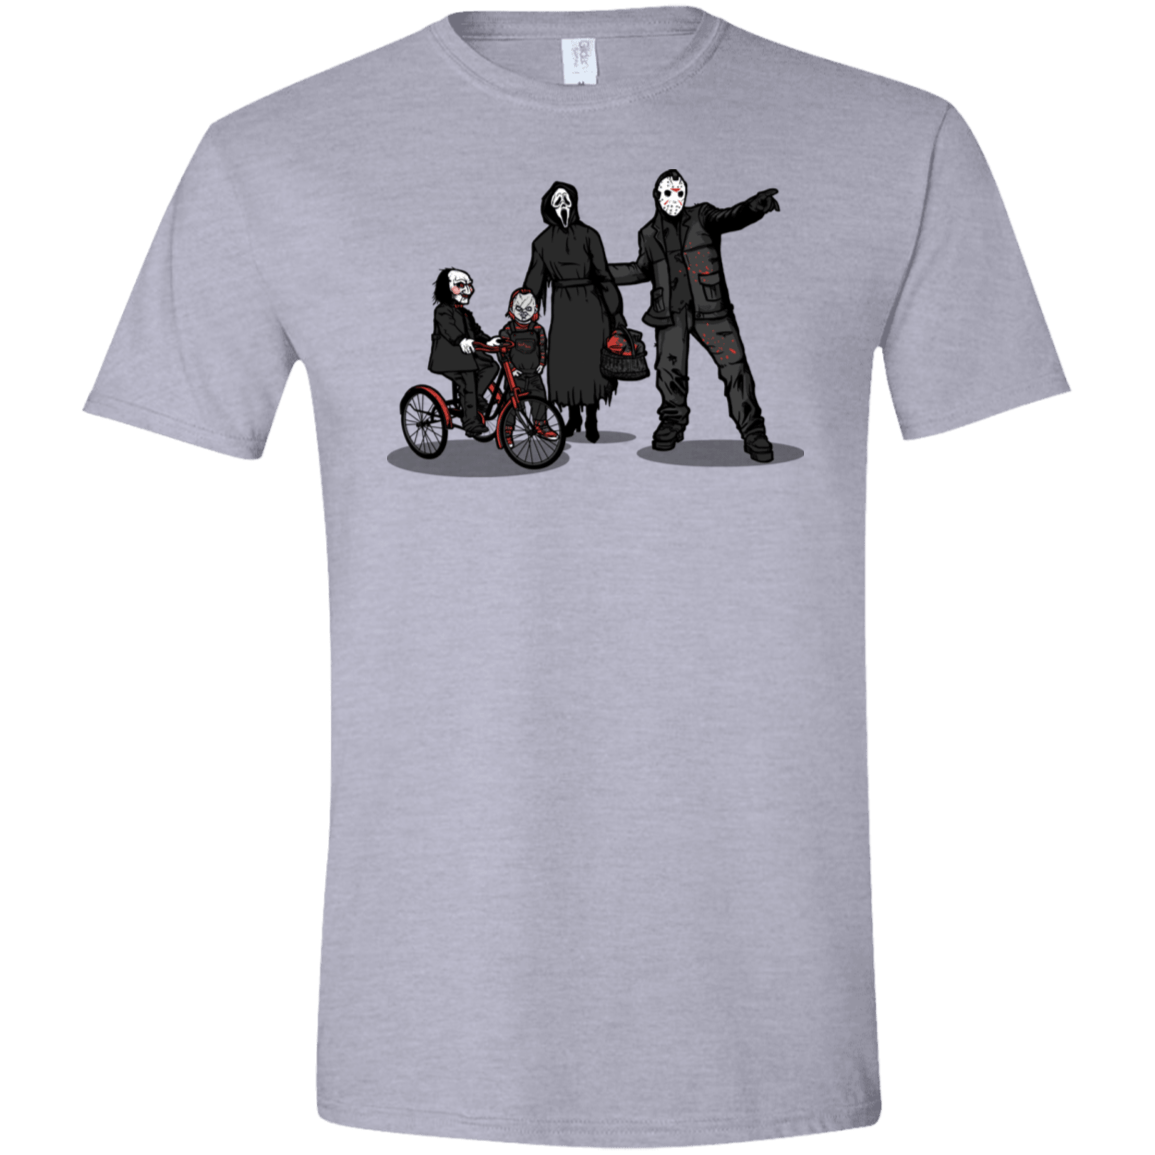 T-Shirts Sport Grey / X-Small Family Values Men's Semi-Fitted Softstyle